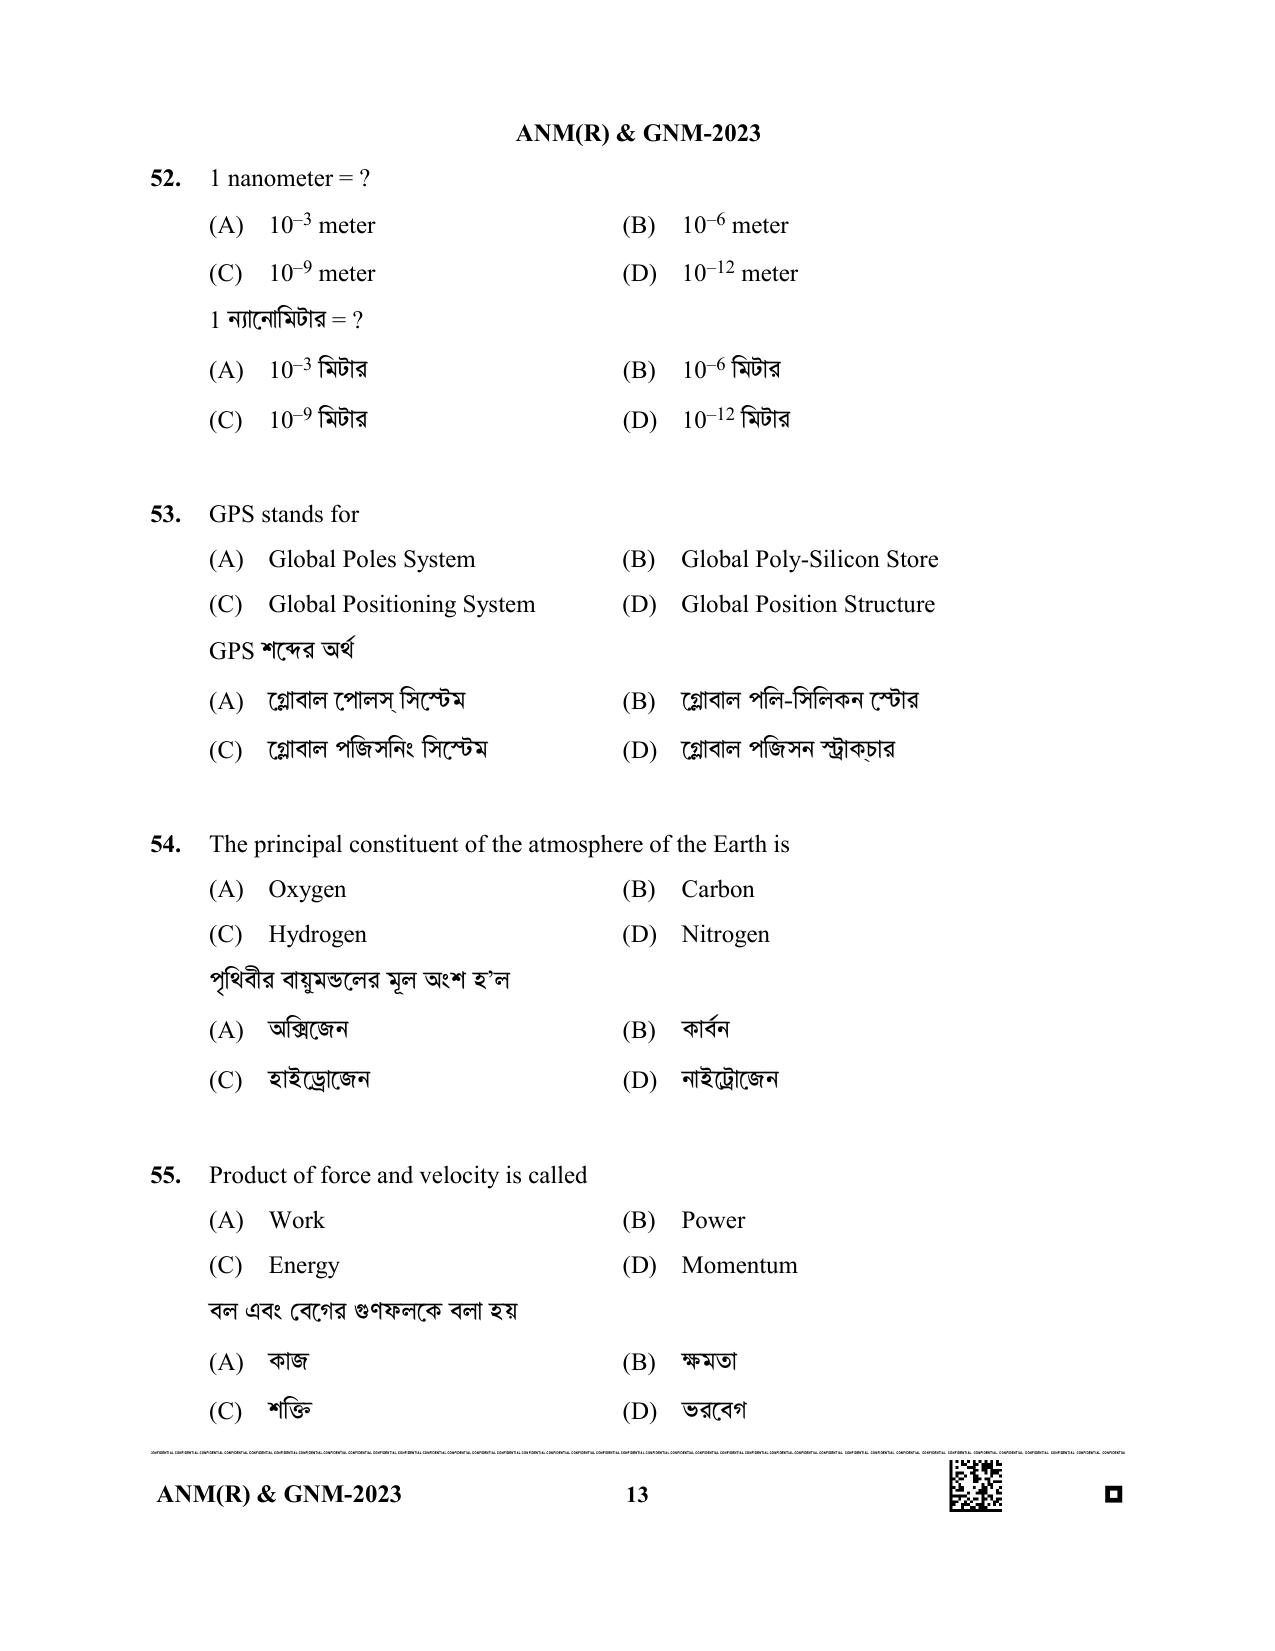 WB ANM GNM 2023 Question Paper - Page 13